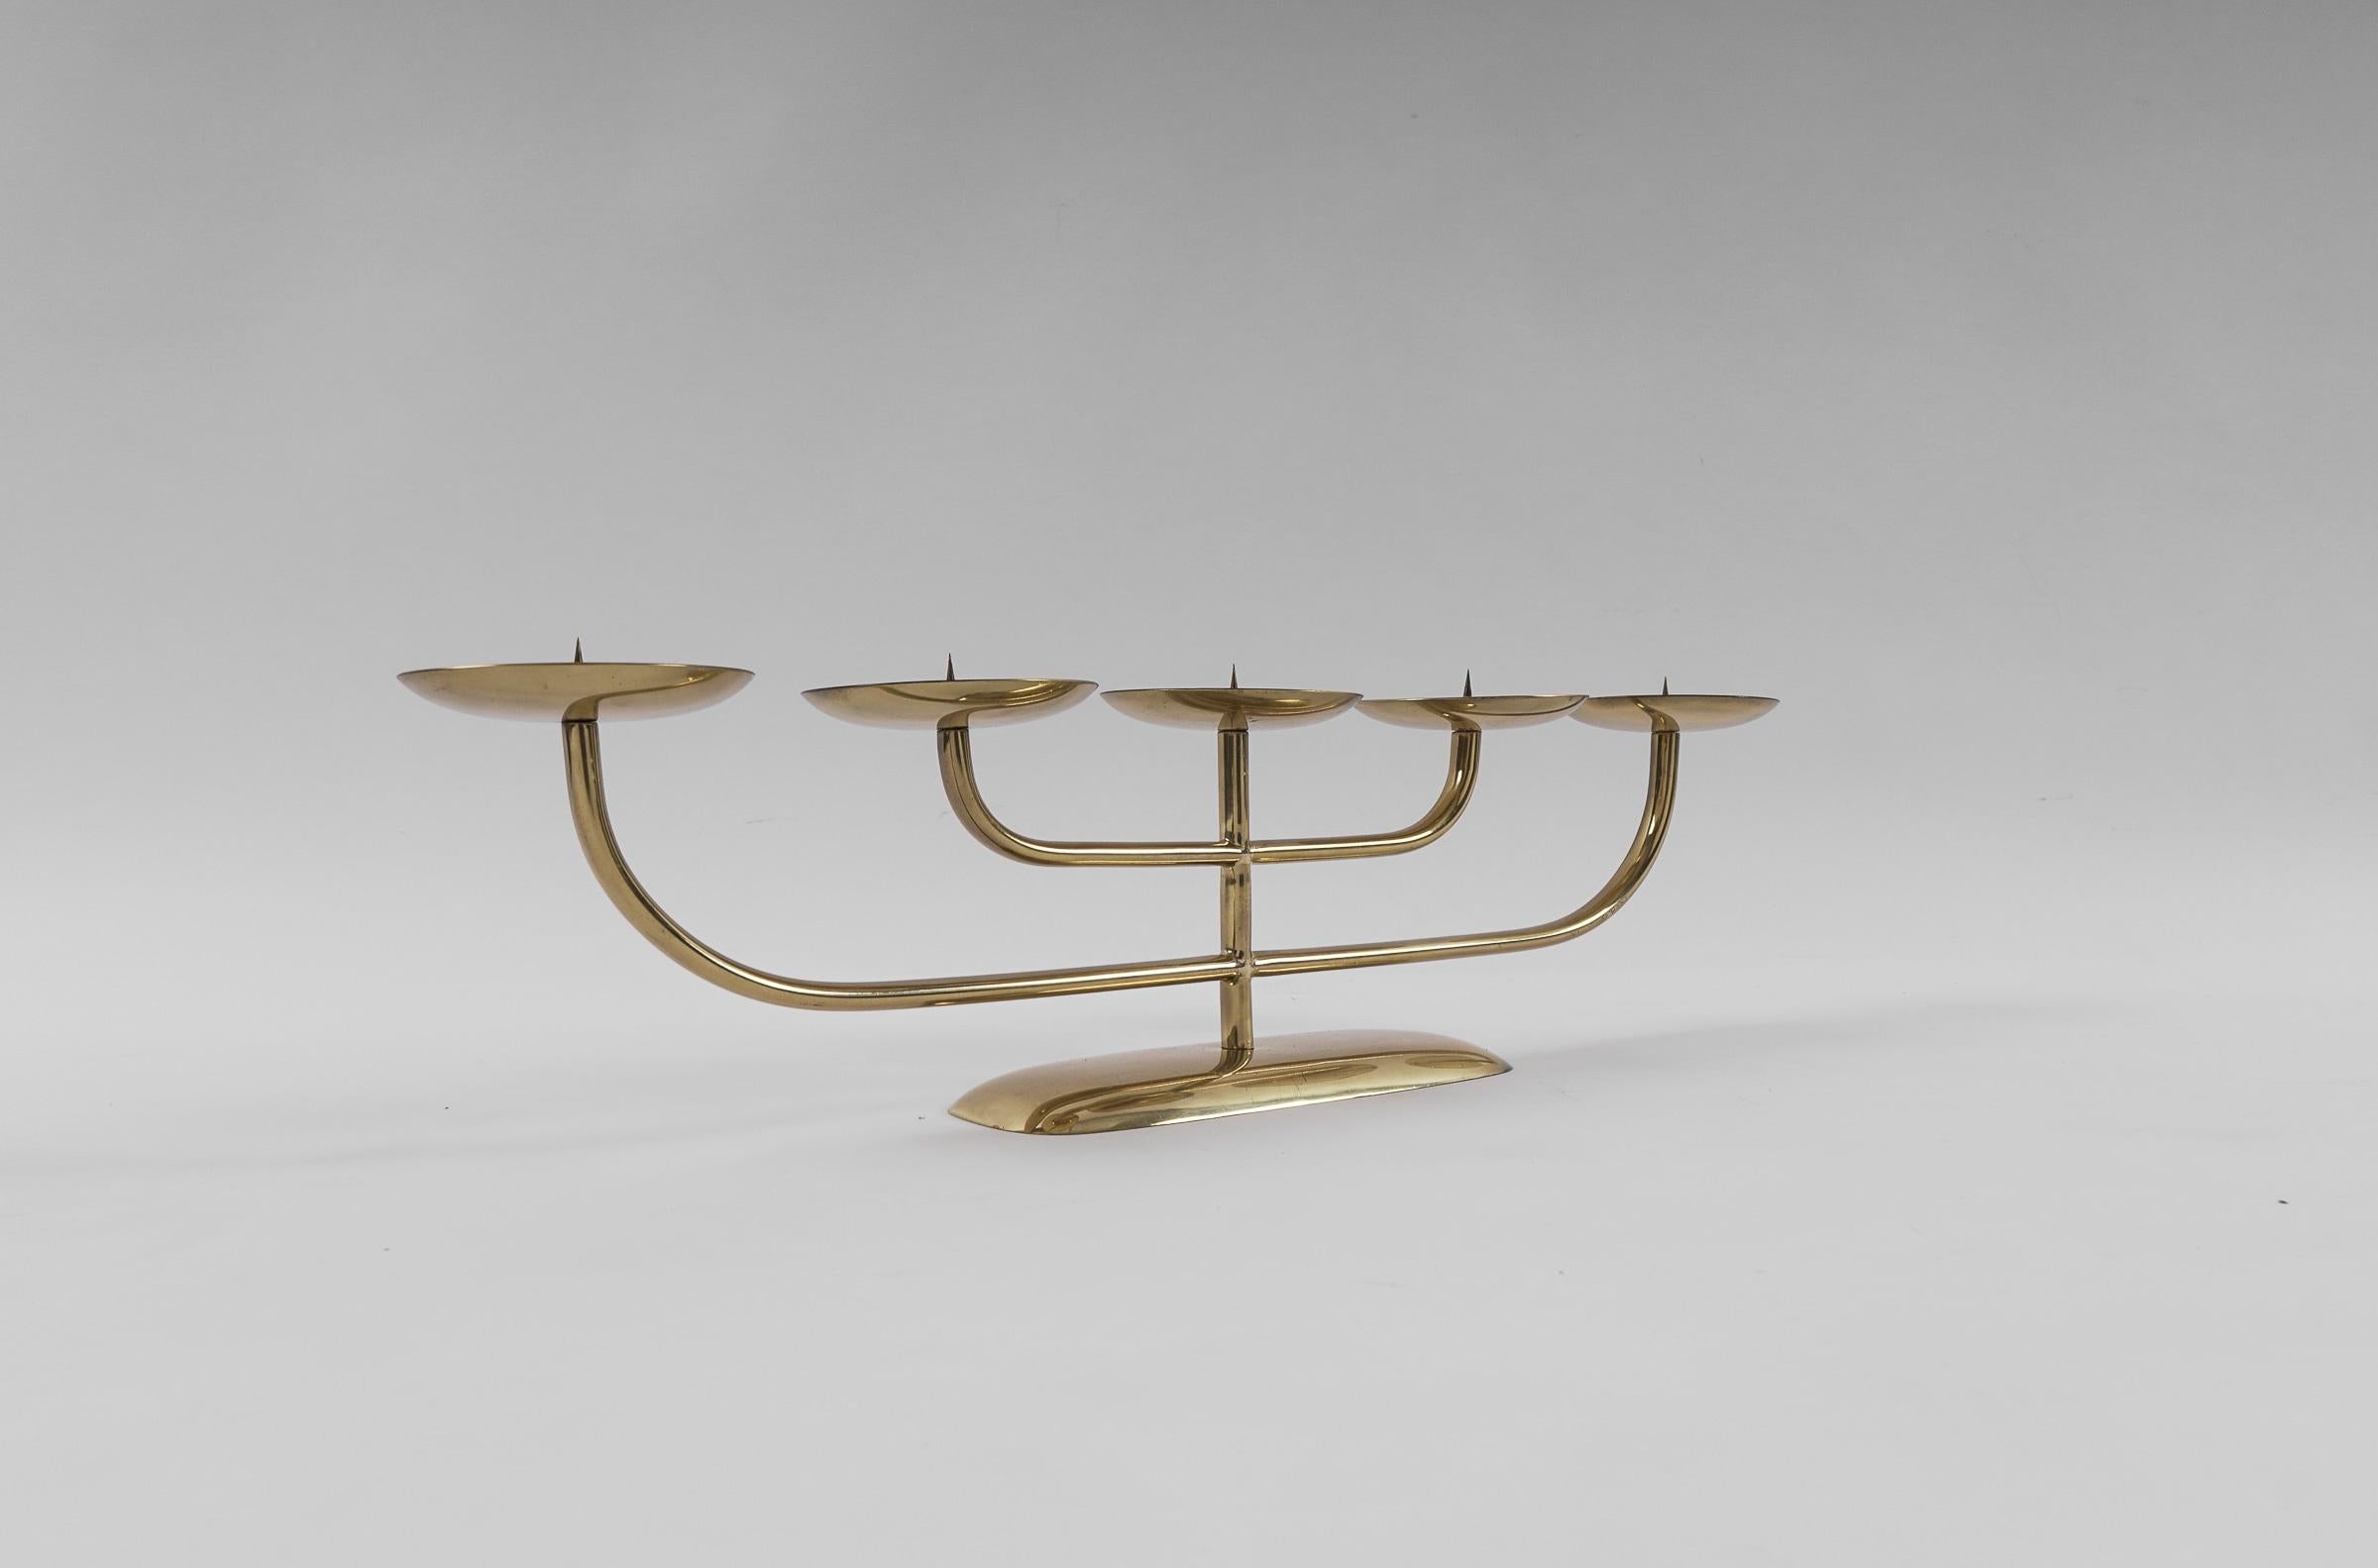 Handmade and probably no longer find so. Solid brass, beautifully patinated. Simple and elegant.